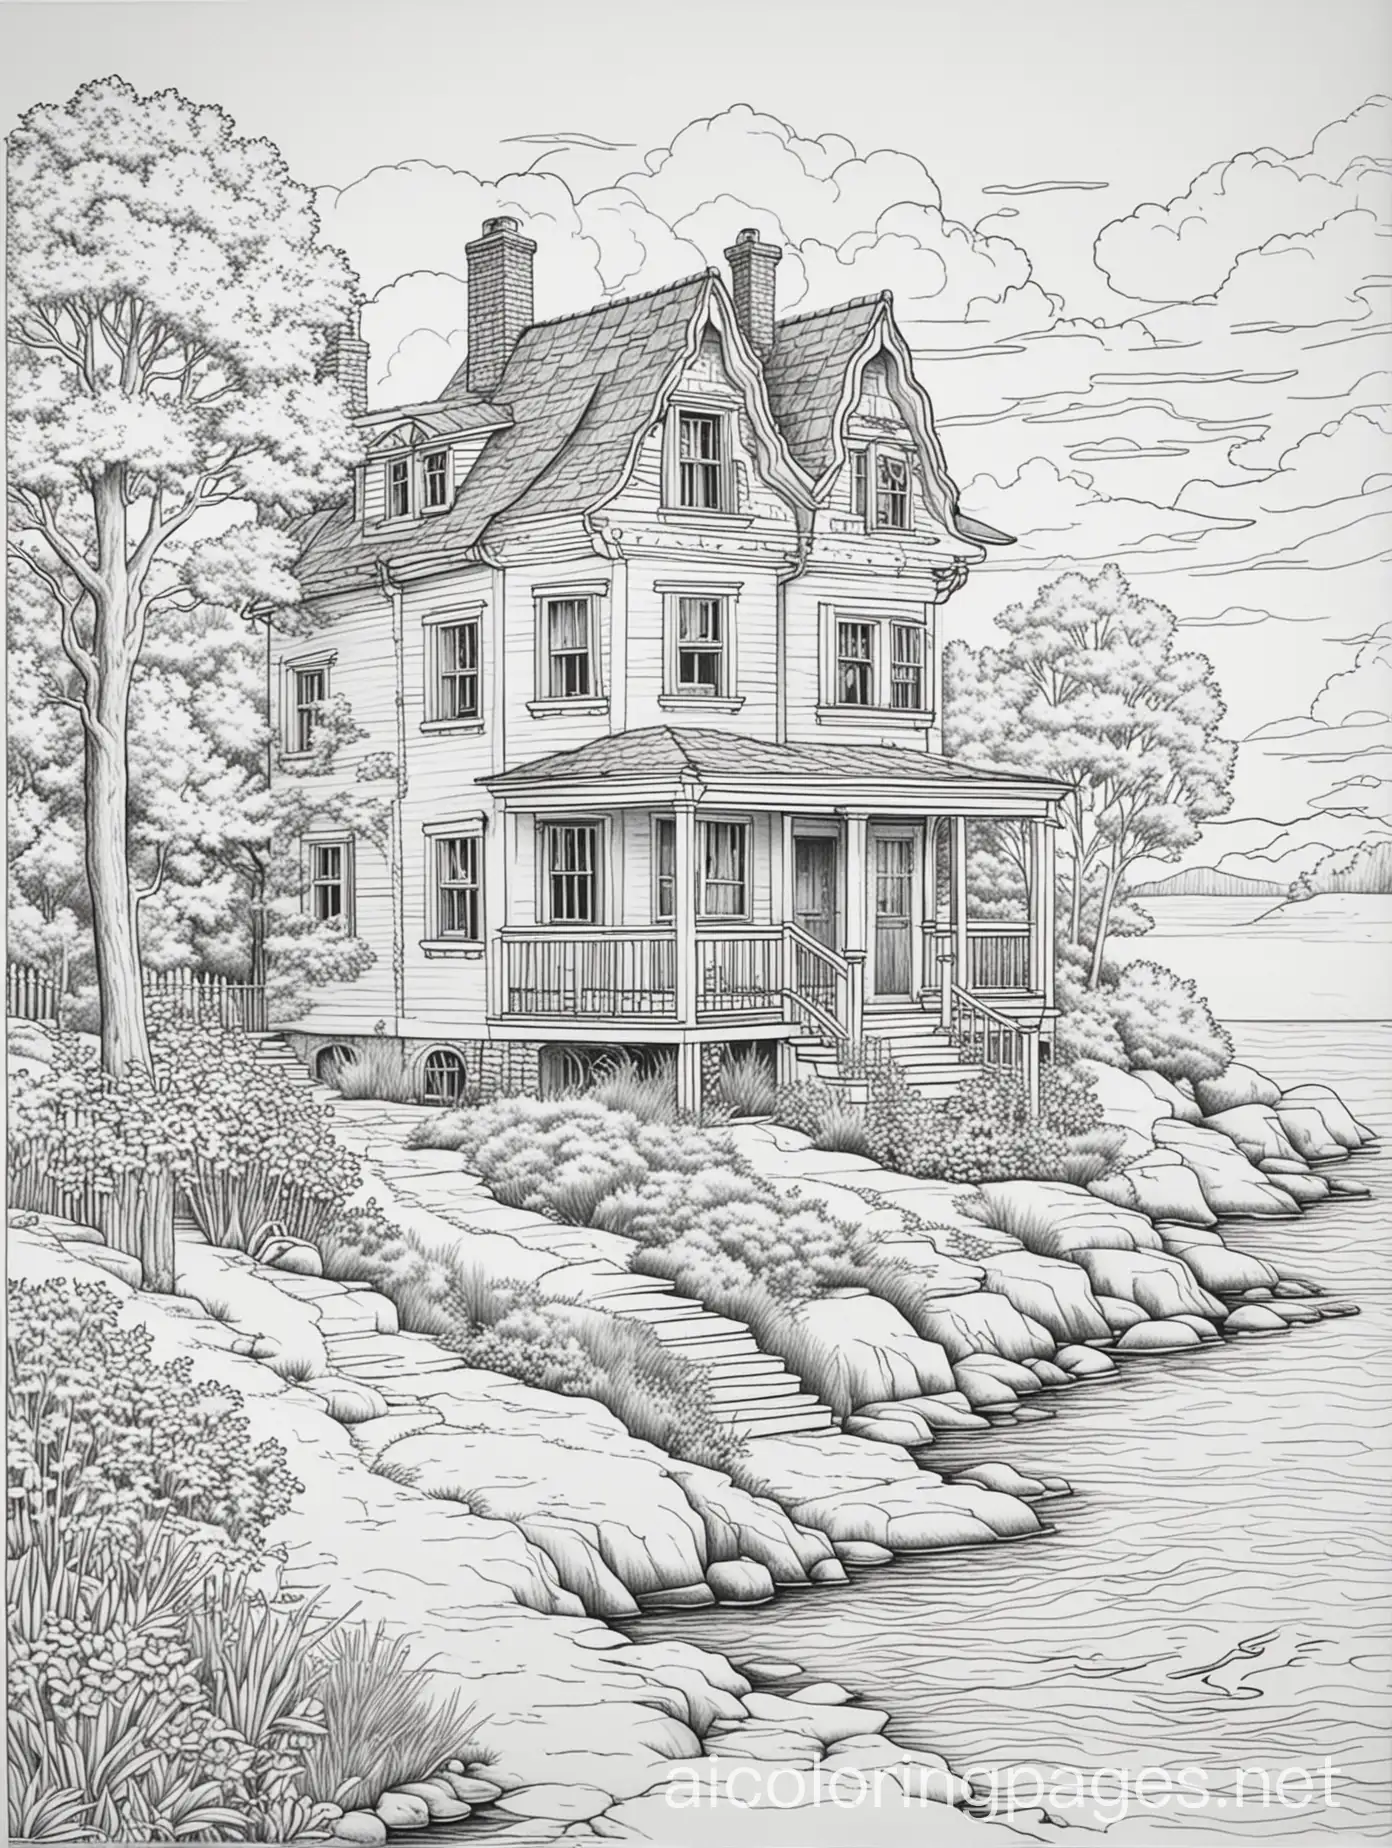 a black and white line drawing of an old house on the lakeshore, coloring page, ample white space, bold lines easy for kids to color inside the lines, Coloring Page, black and white, line art, white background, Simplicity, Ample White Space. The background of the coloring page is plain white to make it easy for young children to color within the lines. The outlines of all the subjects are easy to distinguish, making it simple for kids to color without too much difficulty, Coloring Page, black and white, line art, white background, Simplicity, Ample White Space. The background of the coloring page is plain white to make it easy for young children to color within the lines. The outlines of all the subjects are easy to distinguish, making it simple for kids to color without too much difficulty